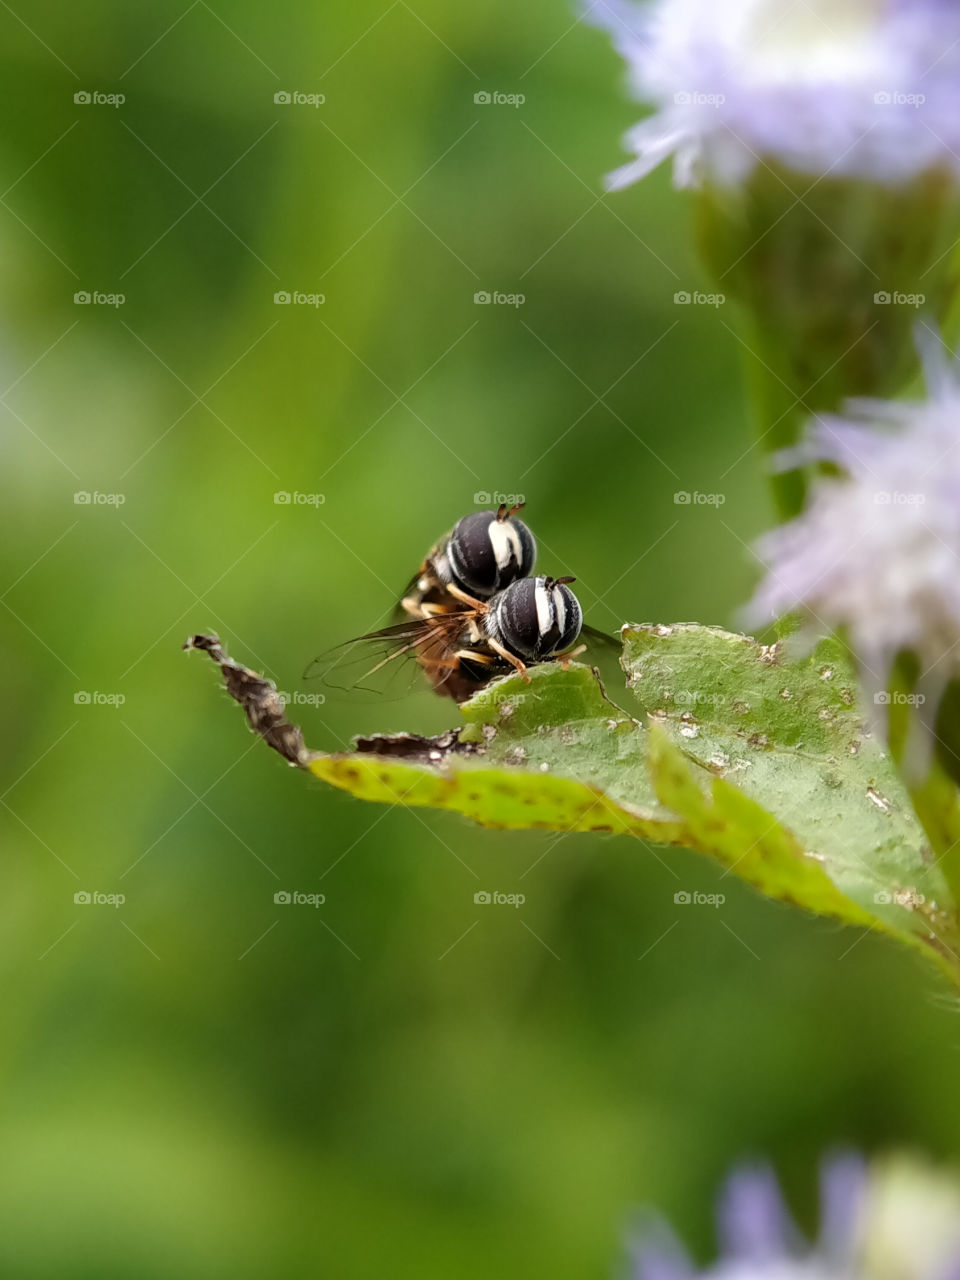 Two hoverflies caught on camera doing a mating.  These insects are pollinators of bush flowers.